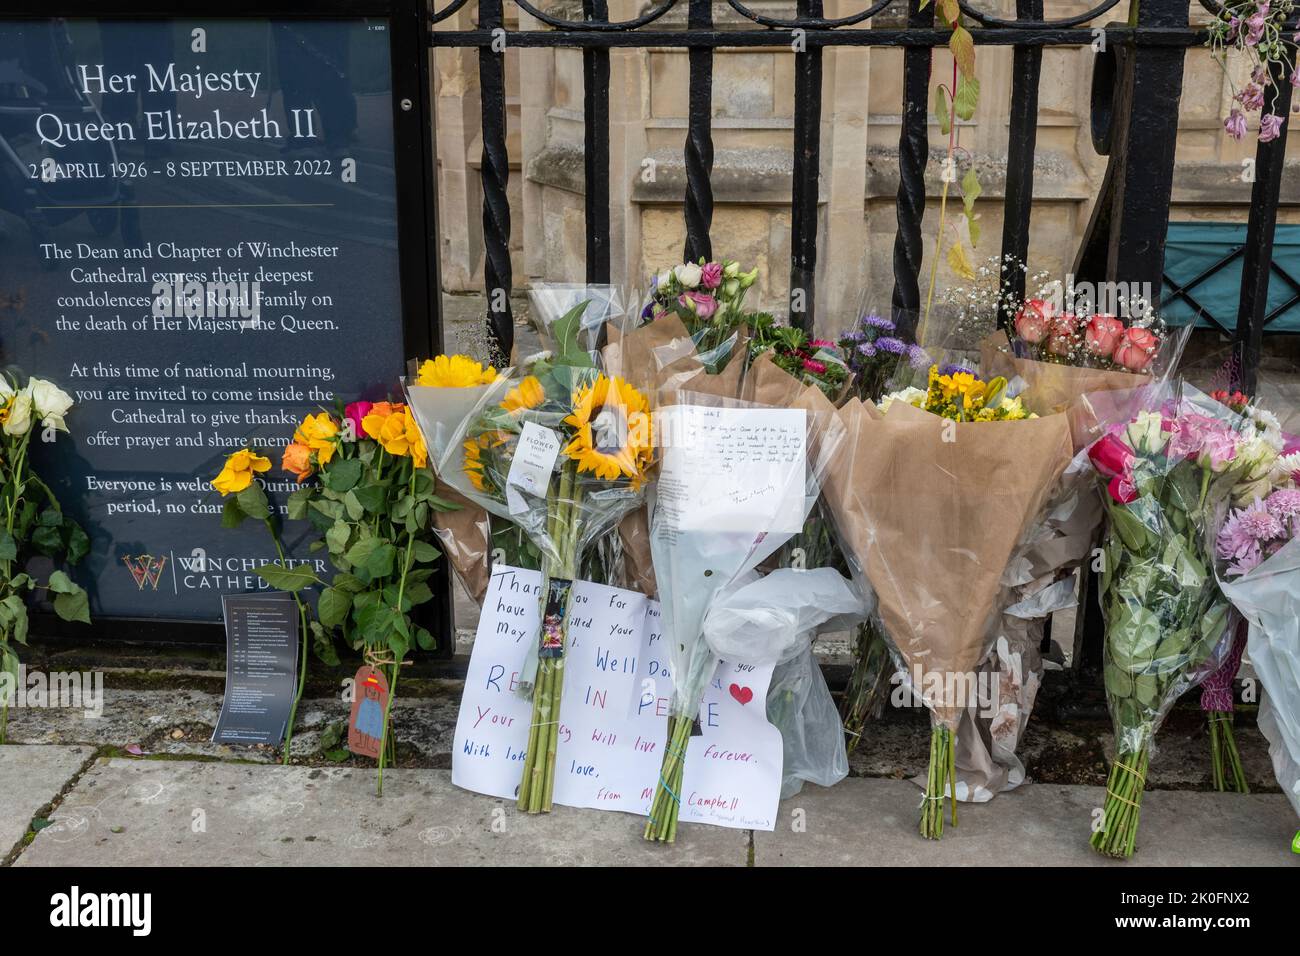 Winchester, Hampshire, UK. 11th September 2022. Following the death of Queen Elizabeth II on 8th September 2022, people have placed flowers and tributes in honour of Queen Elizabeth II outside the entrance to Winchester Cathedral. The country is in a period of national mourning until her funeral. Stock Photo